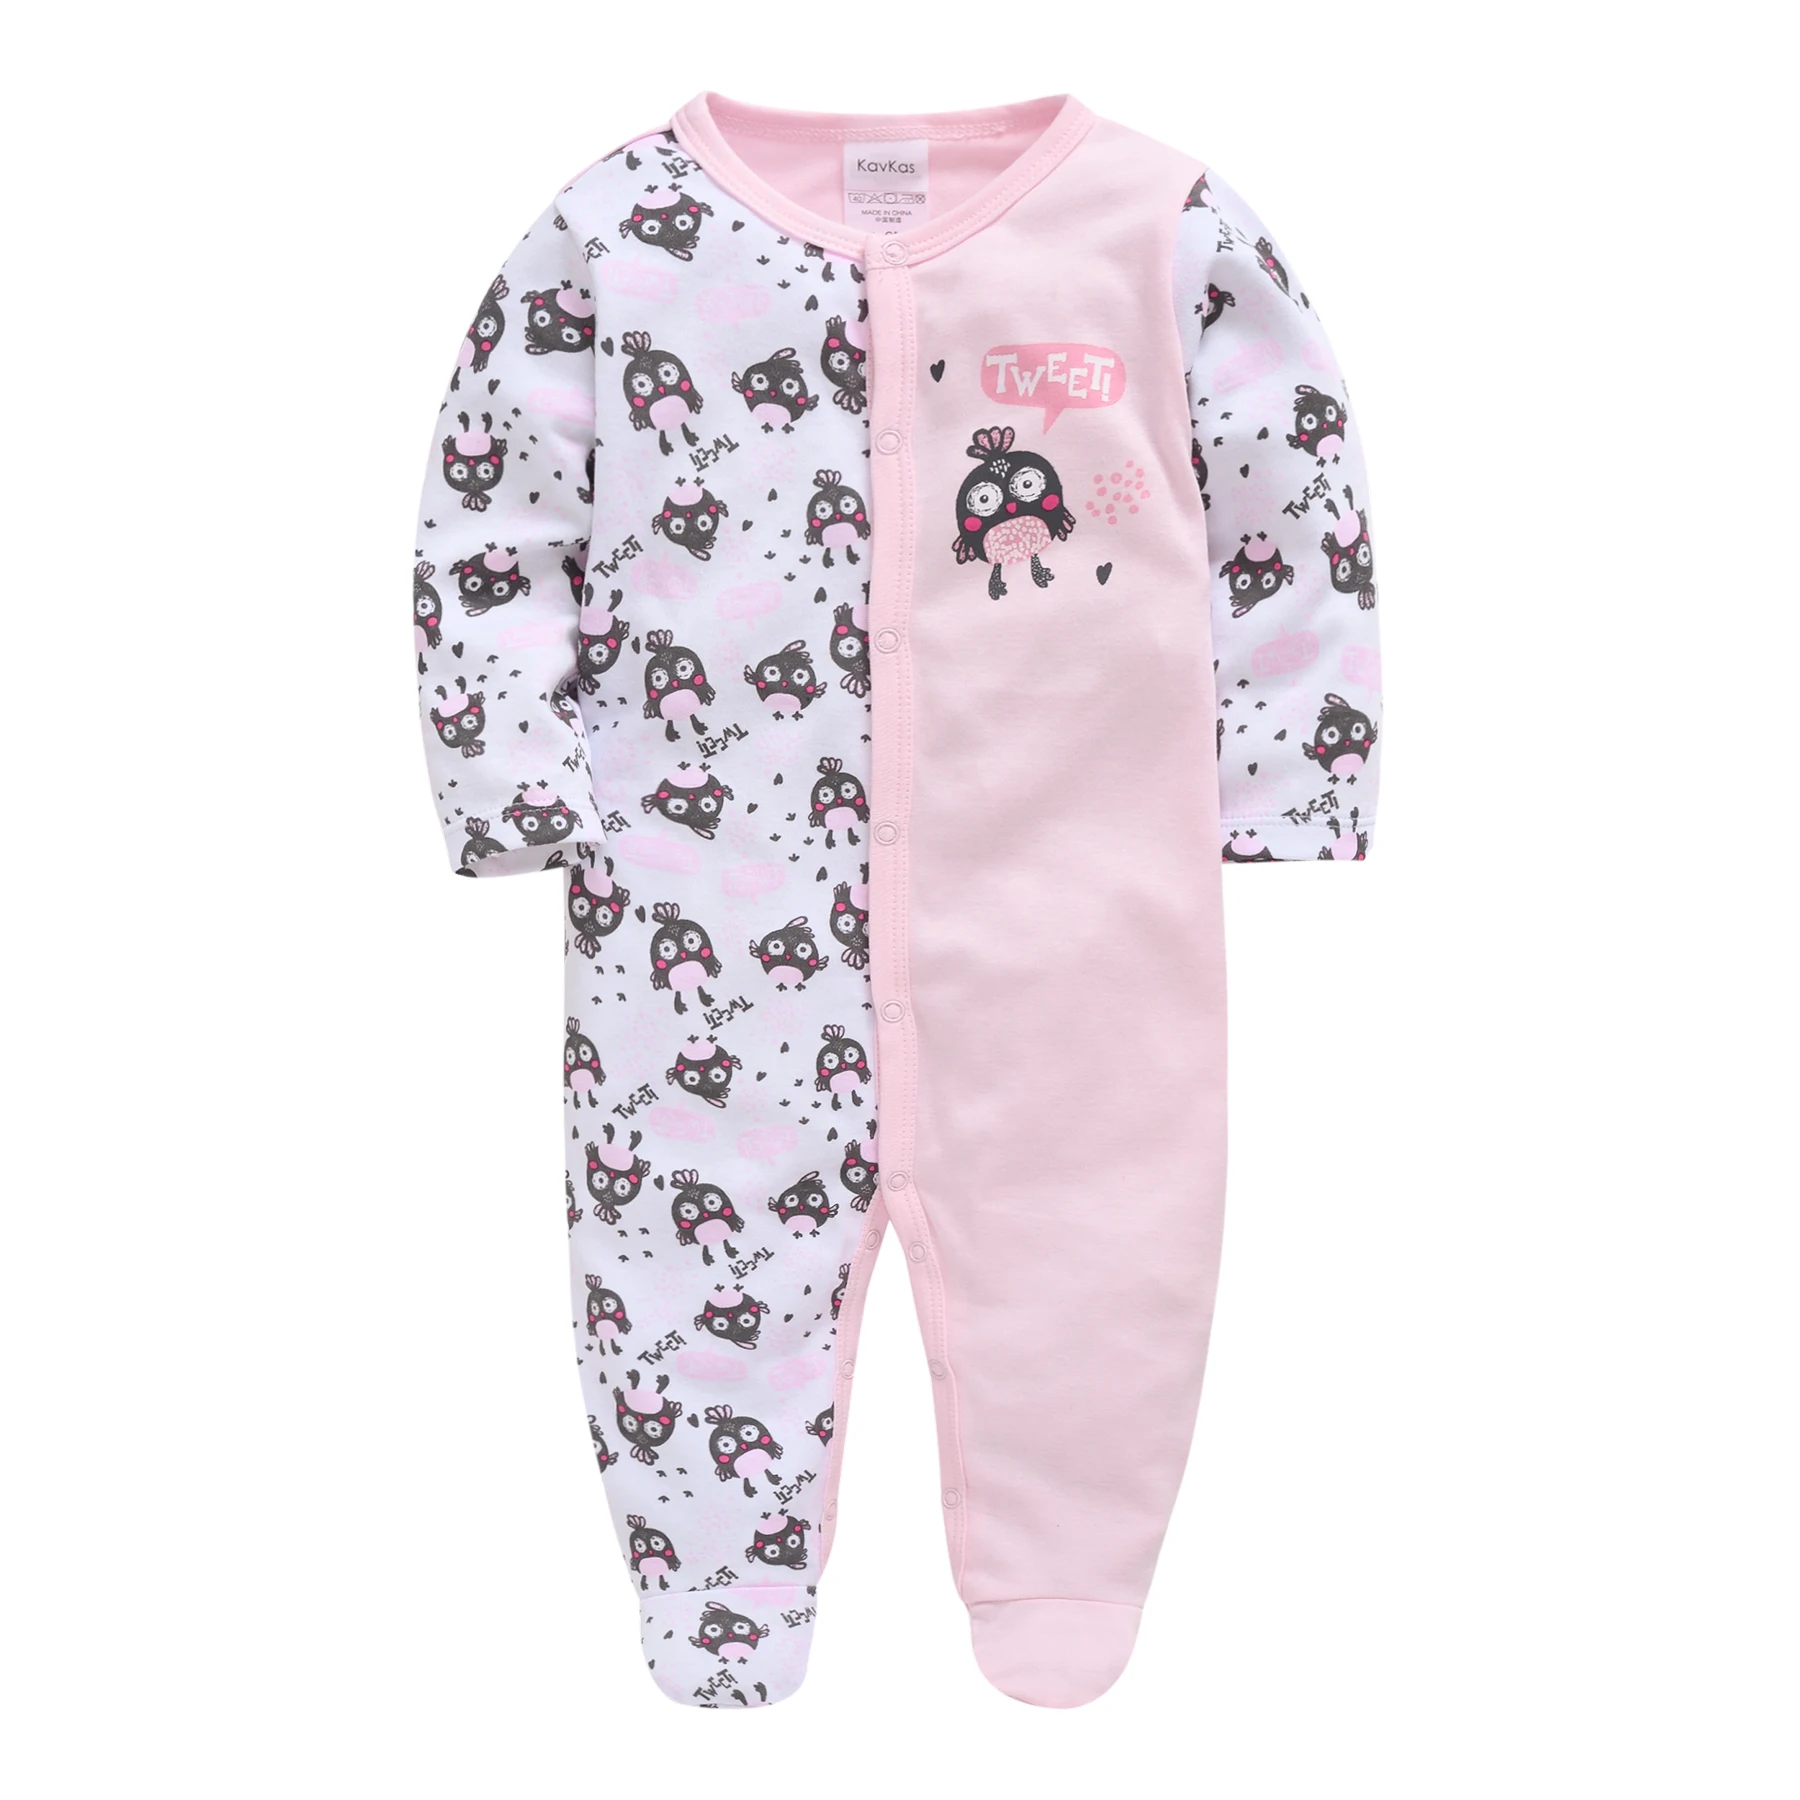 

Baby Girl Romper Toddler Boys Clothes Combi And Playsuit Cartoon Print Jumpsuit New Born Infant Pop It 100% Cotton Soft Onesie